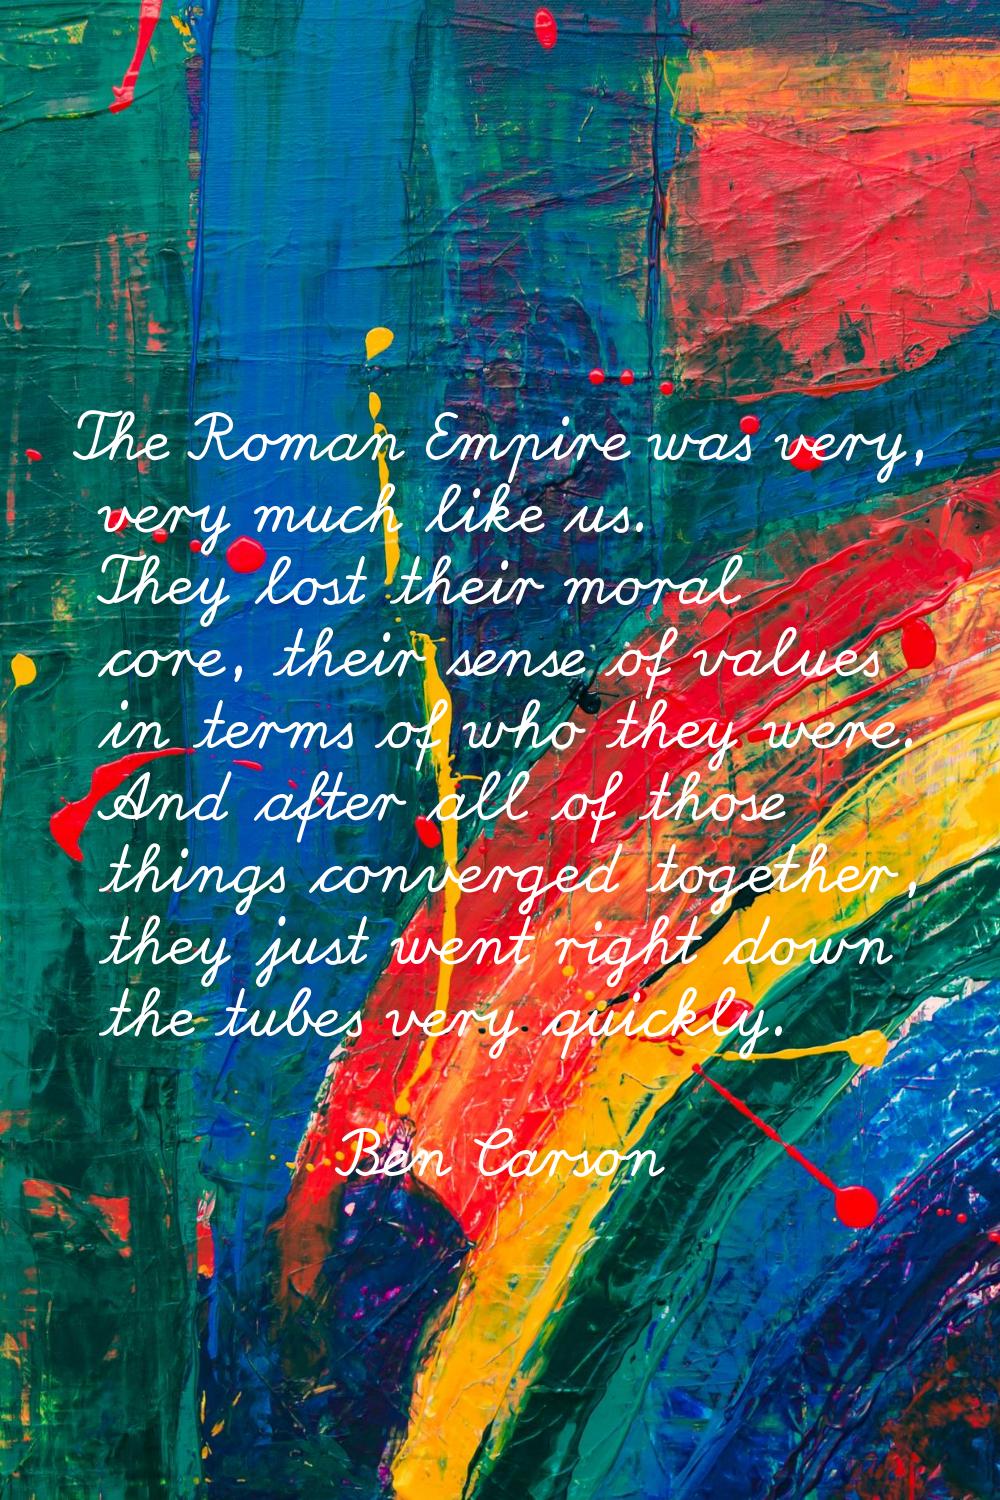 The Roman Empire was very, very much like us. They lost their moral core, their sense of values in 